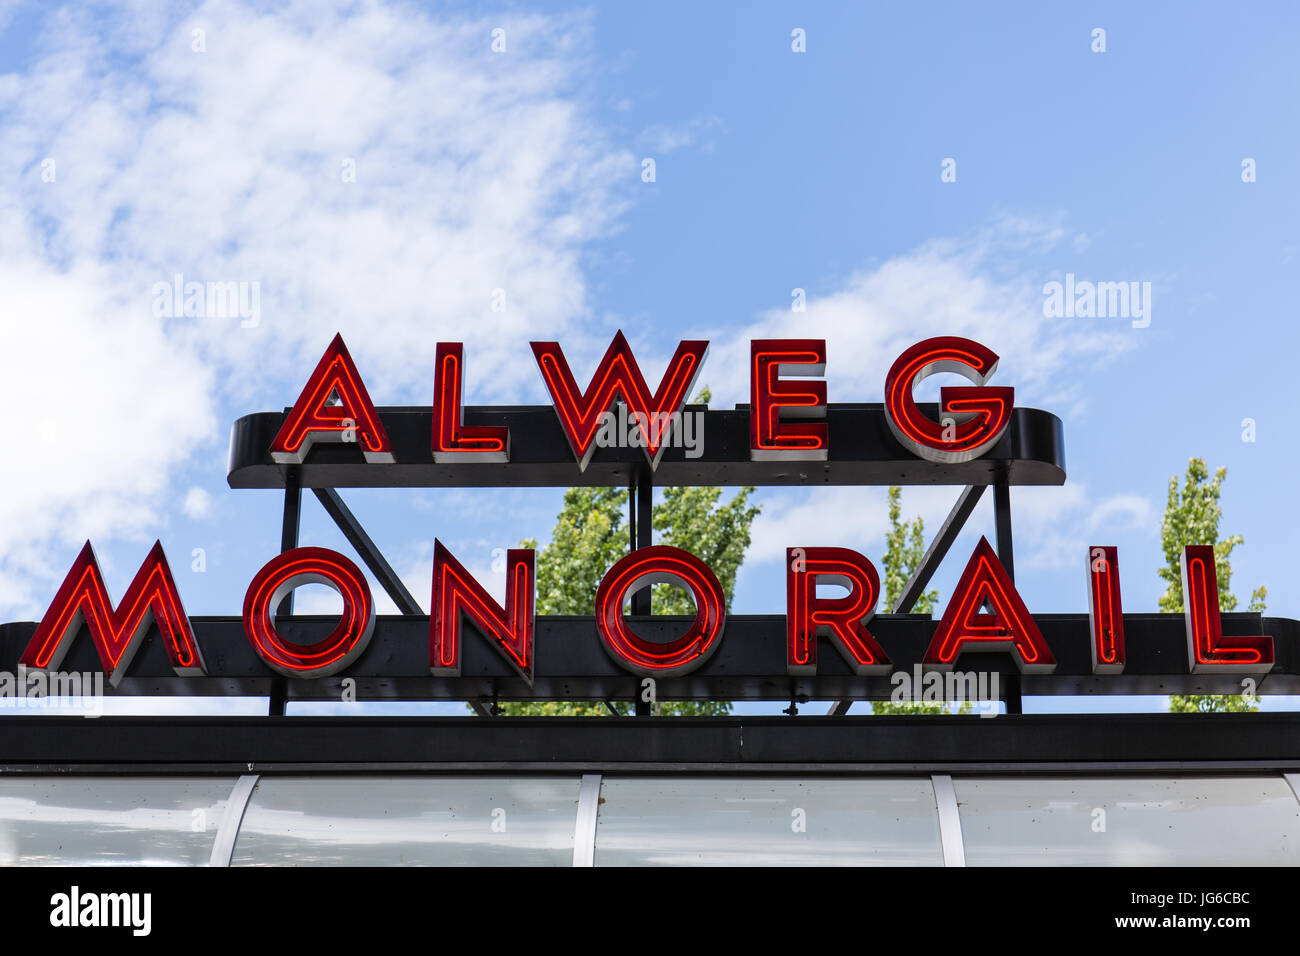 Red neon sign for Alweg Monorail at Seattle Center's monorail station in Seattle, Washington Stock Photo